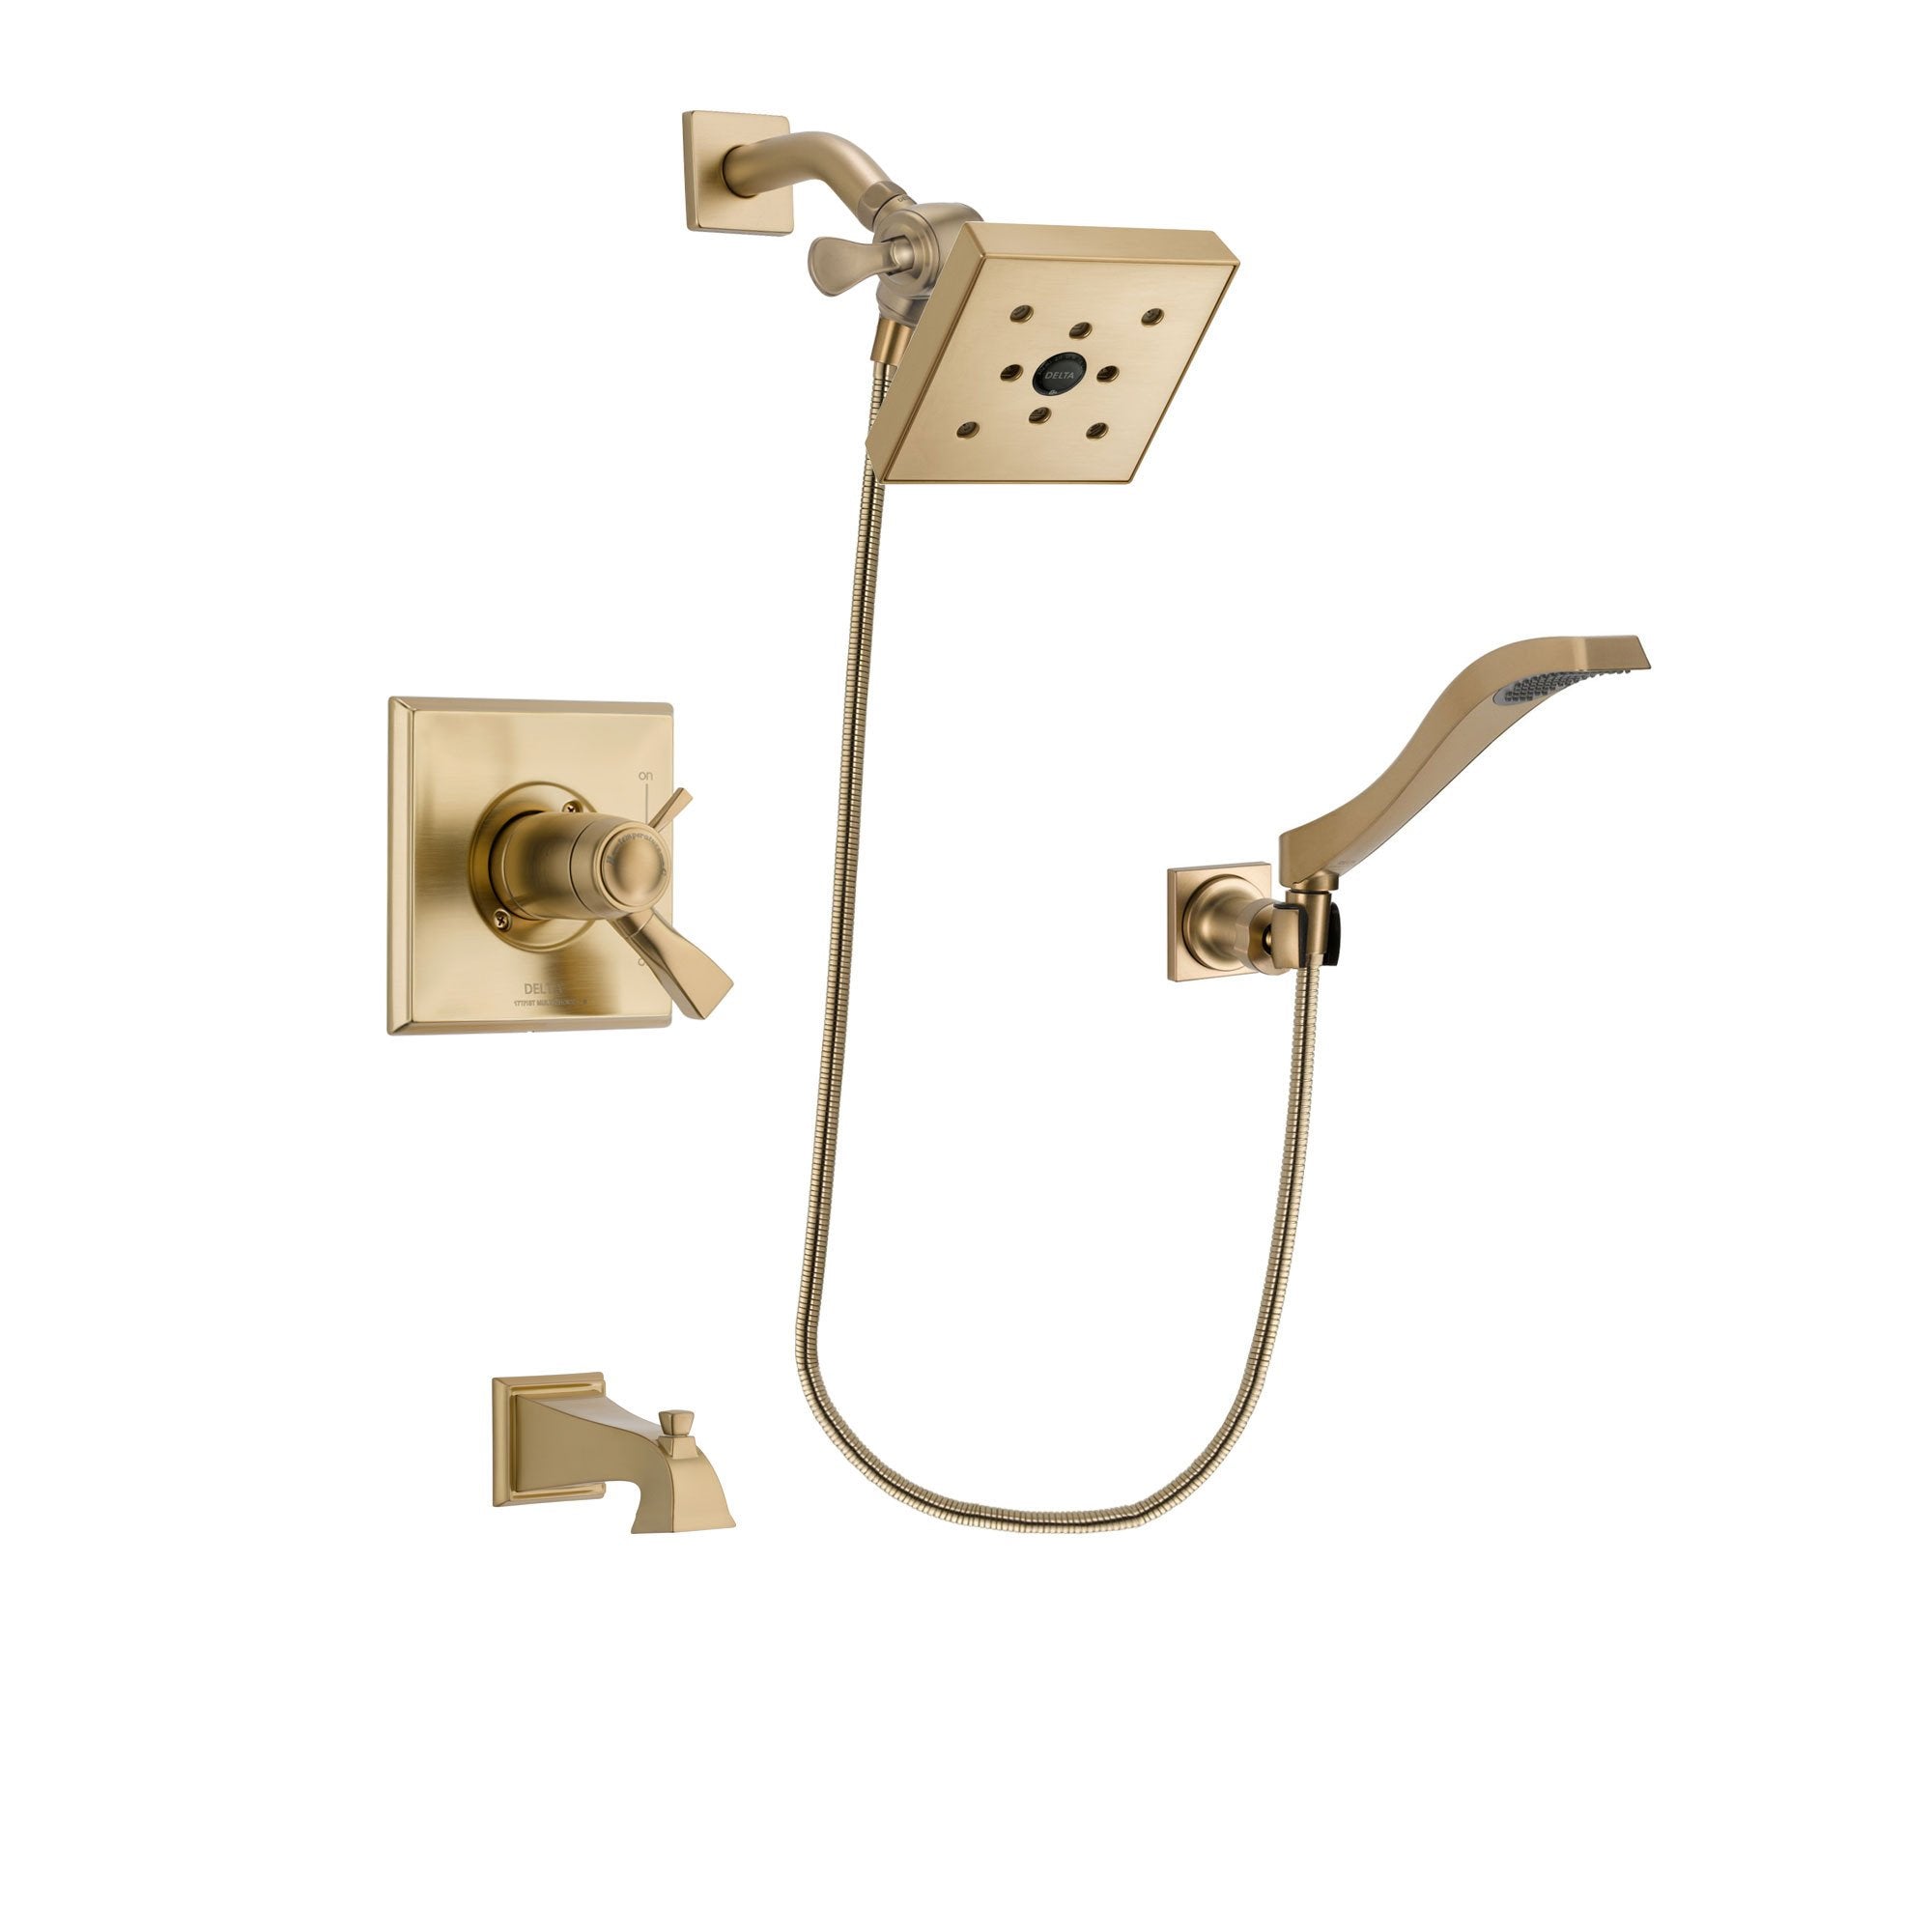 Delta Dryden Champagne Bronze Finish Thermostatic Tub and Shower Faucet System Package with Square Shower Head and Modern Wall Mount Handheld Shower Spray Includes Rough-in Valve and Tub Spout DSP3861V